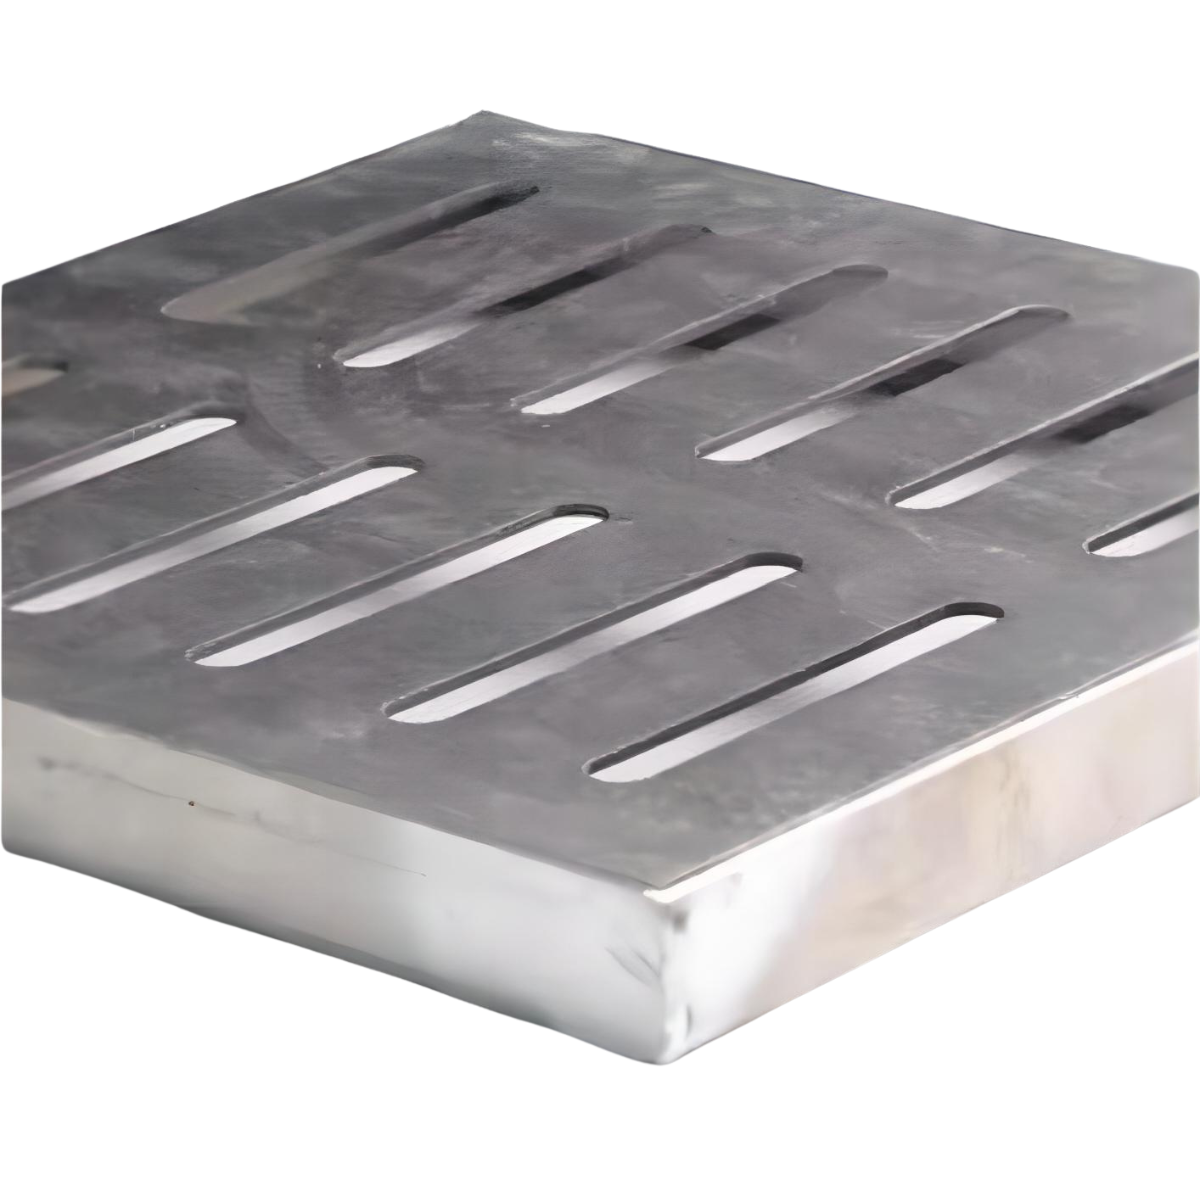 Stainless steel customization Stainless steel rain manhole cover drain grate Gutter cover Square manhole cover